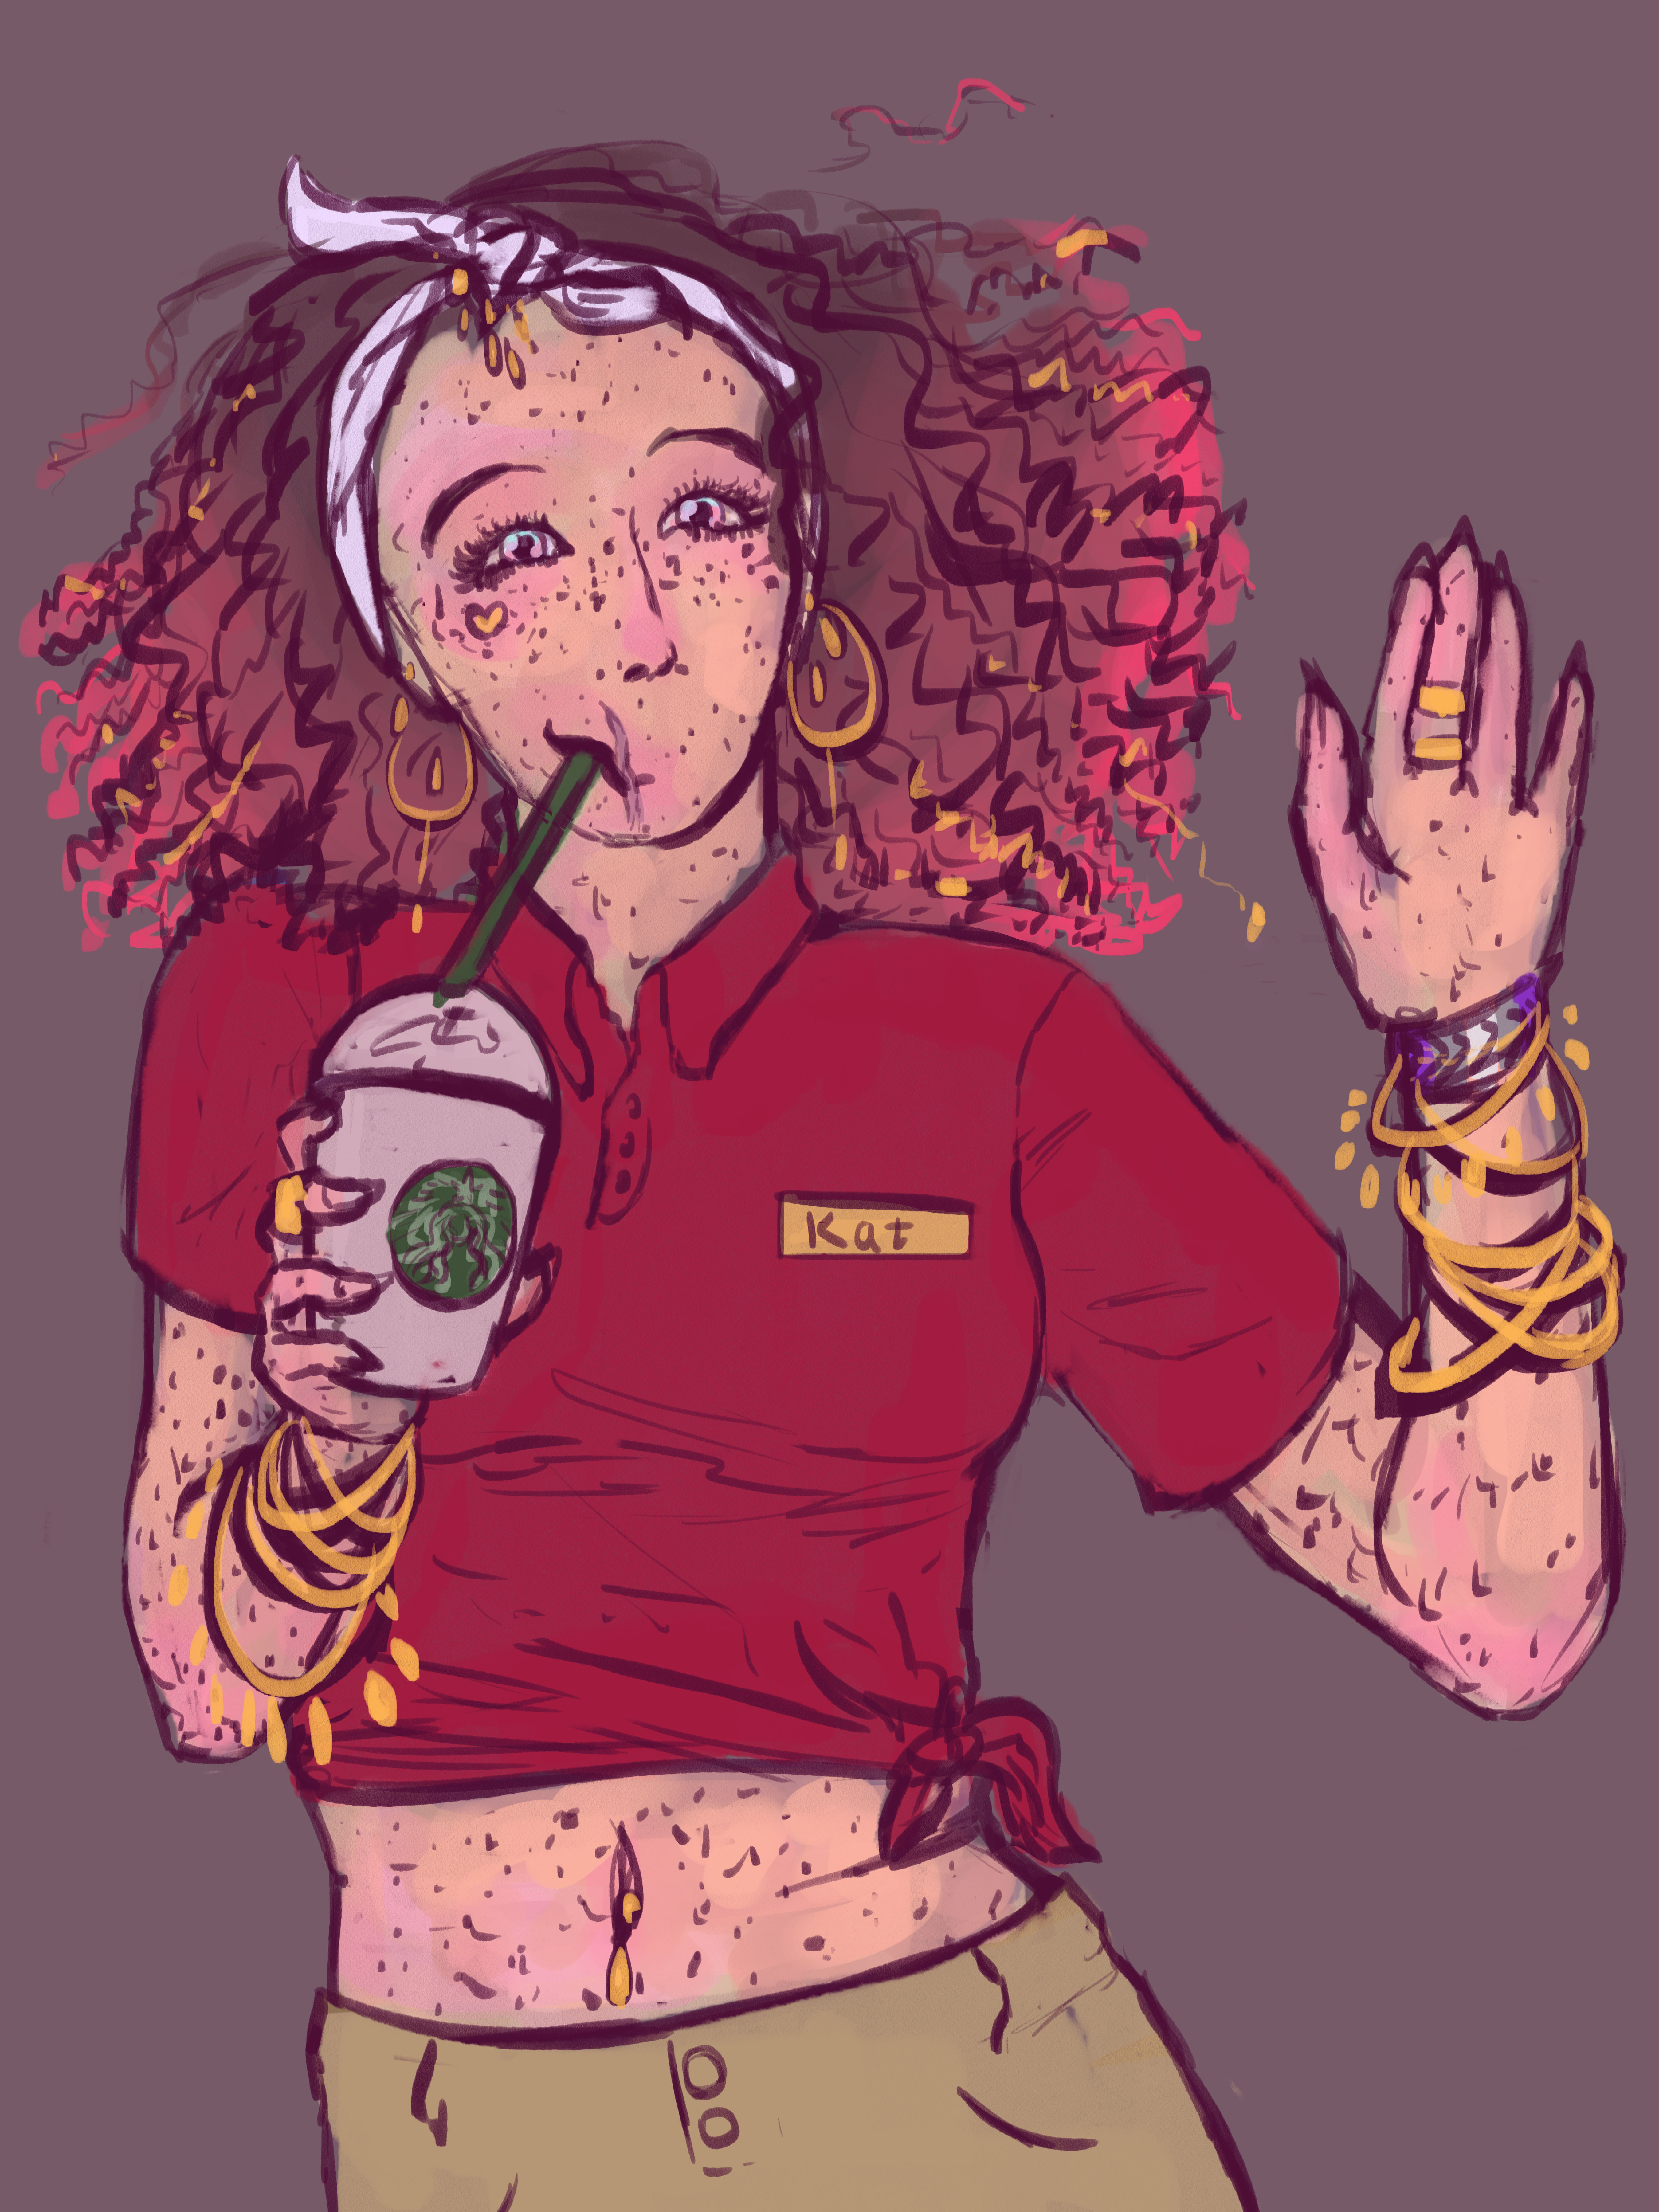 A human version of Kat waving happily and sipping a drink